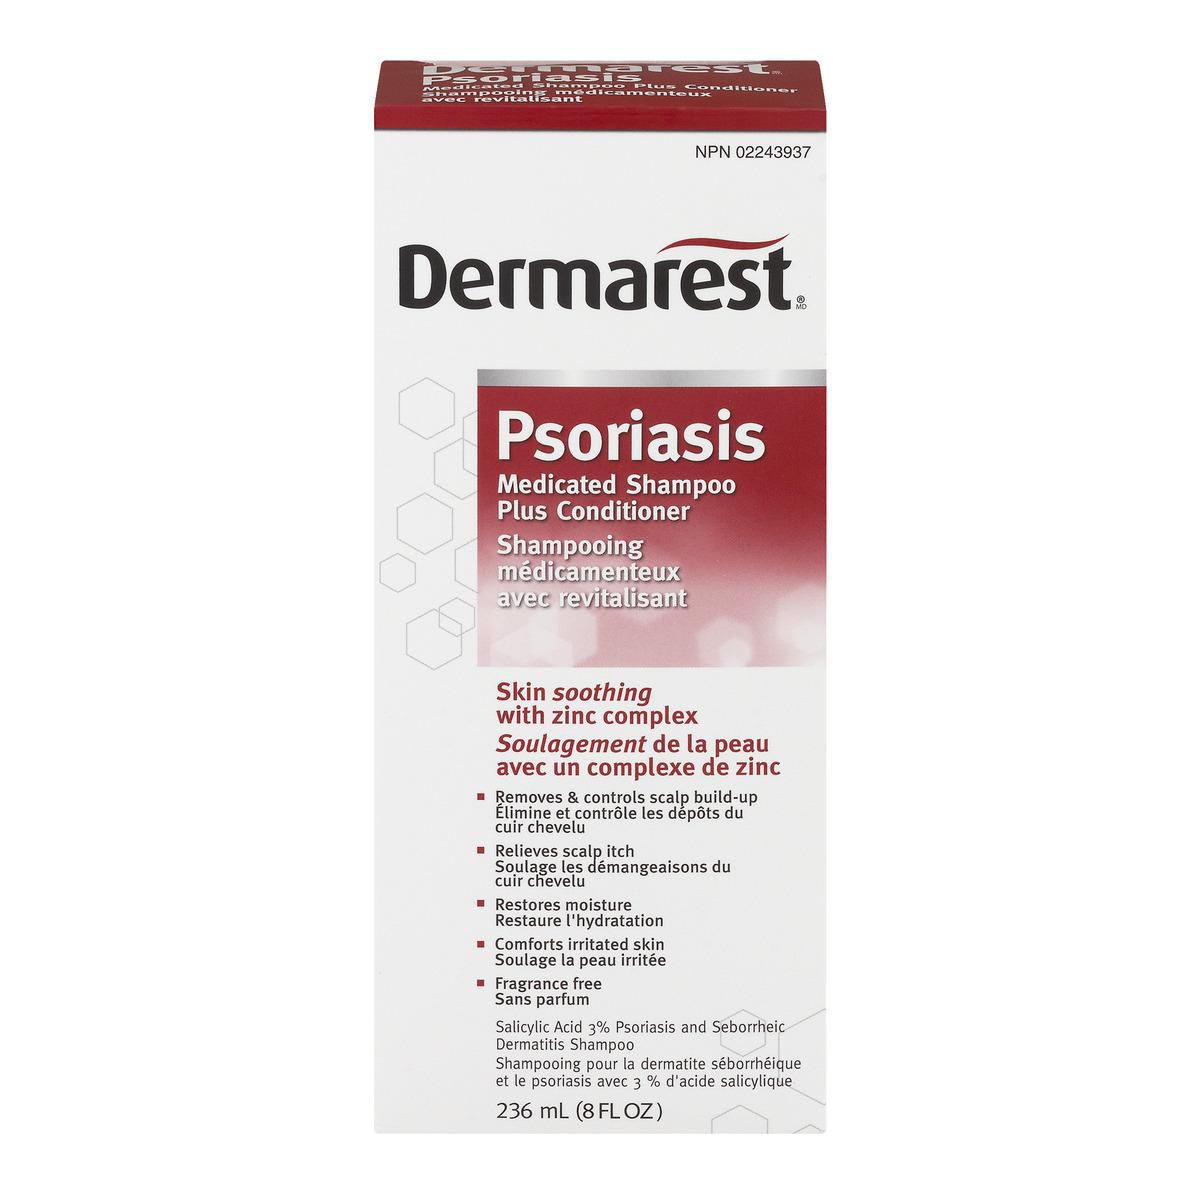 psoriasin ointment shoppers drug mart